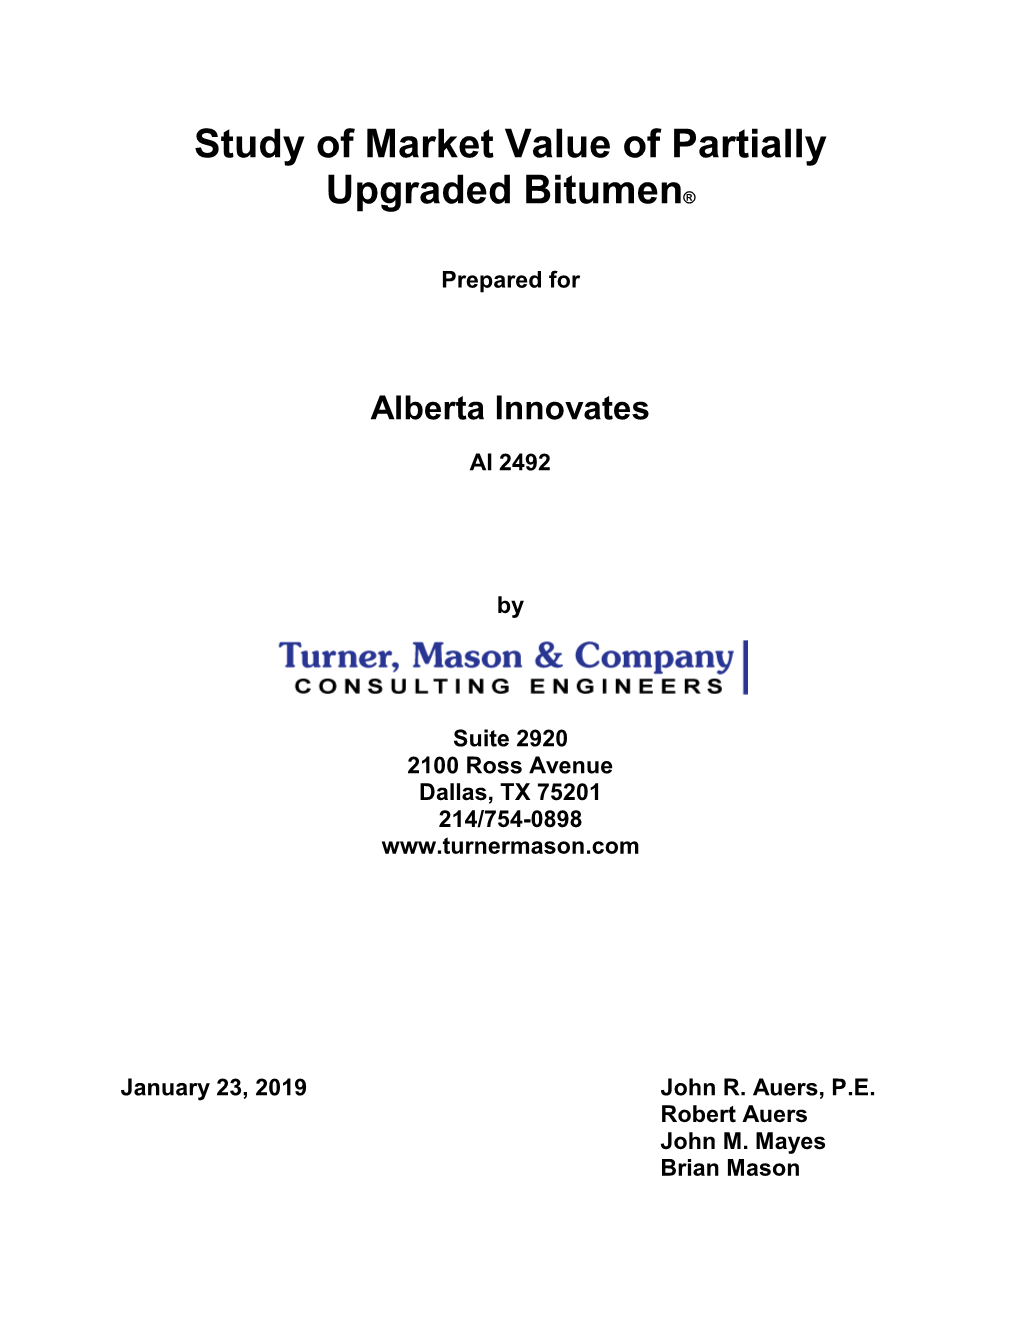 Study of Market Value of Partially Upgraded Bitumen®